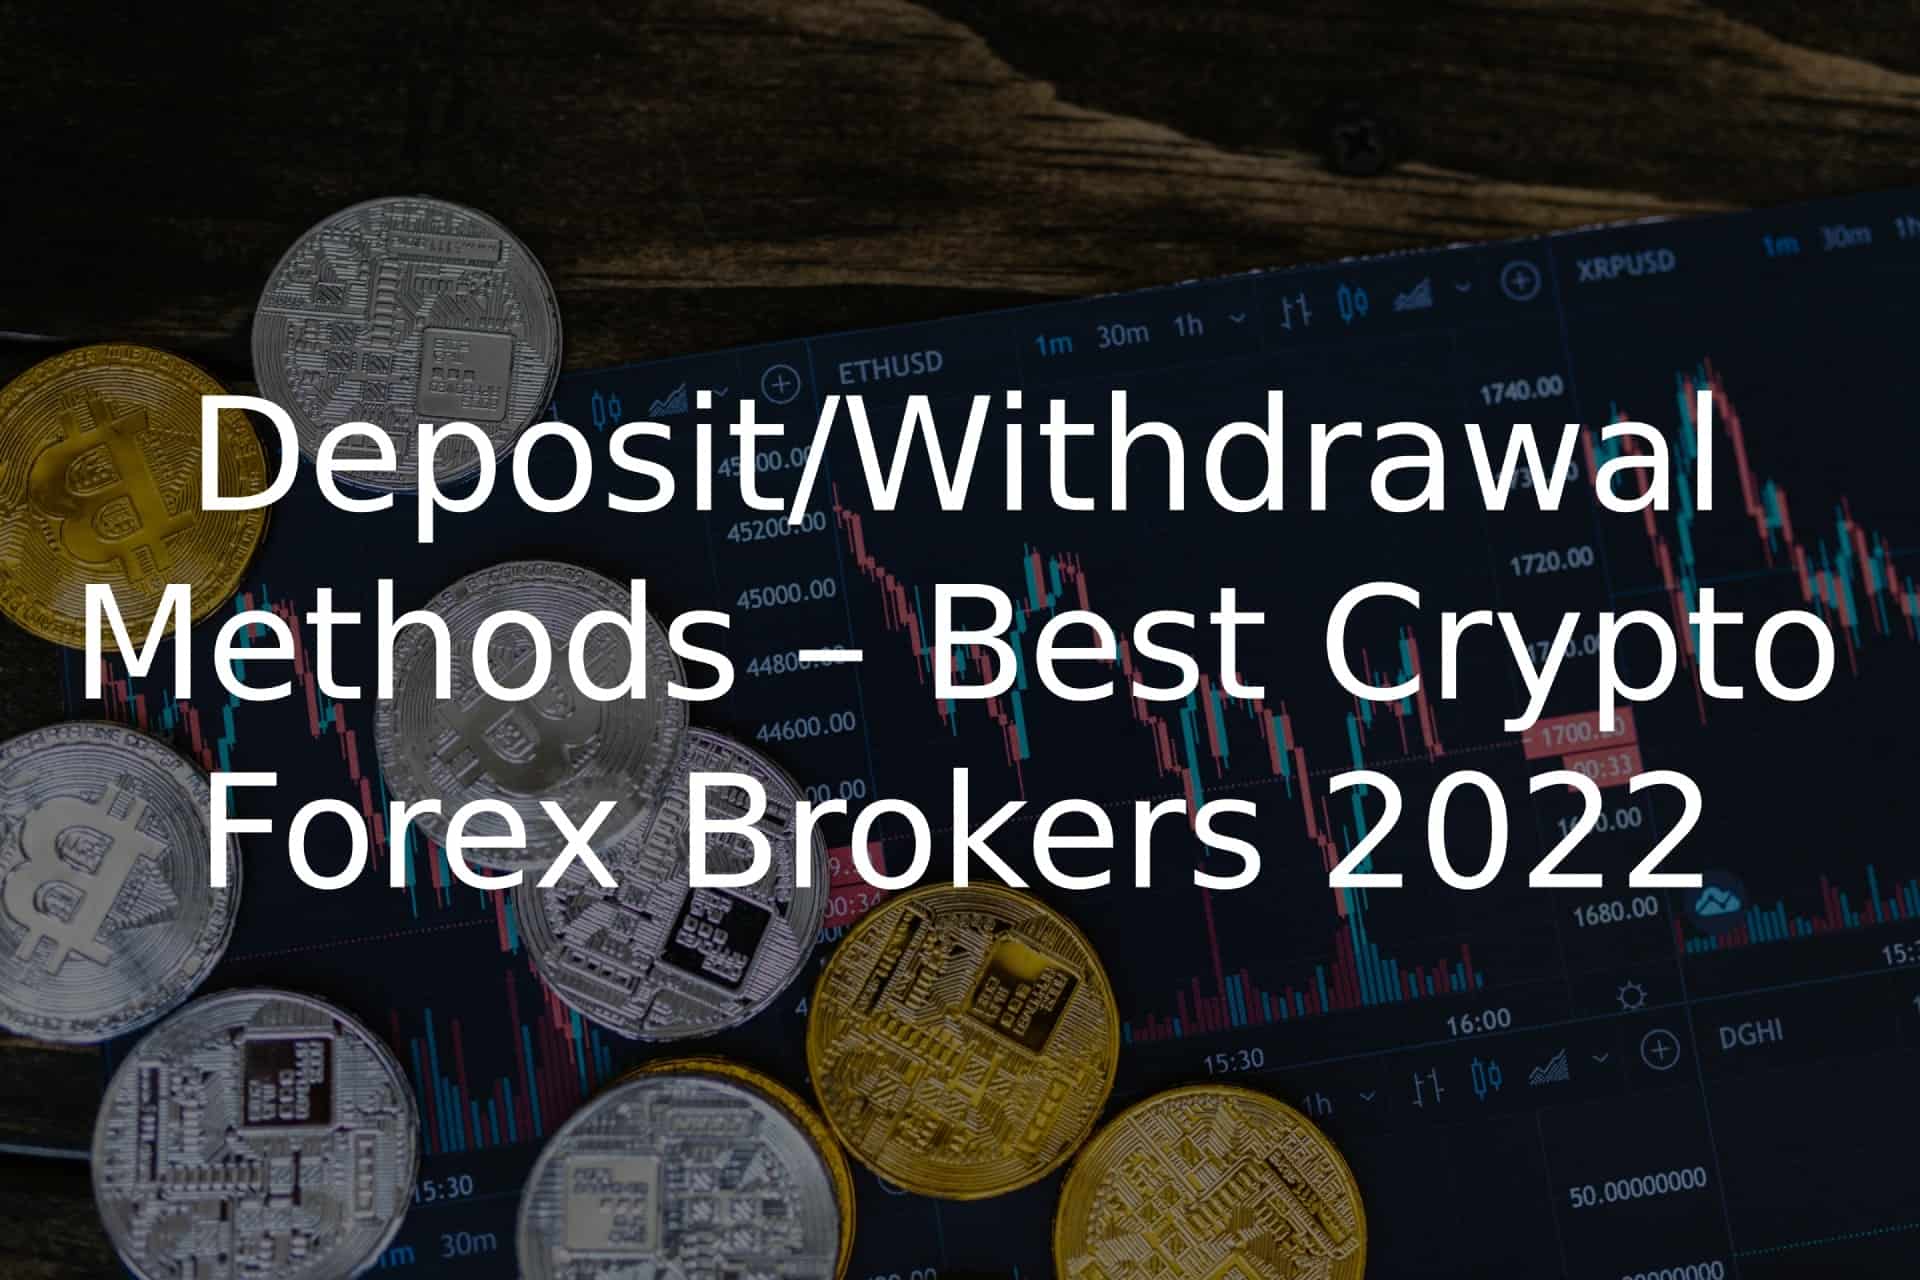 Best-Crypto-Forex-Brokers